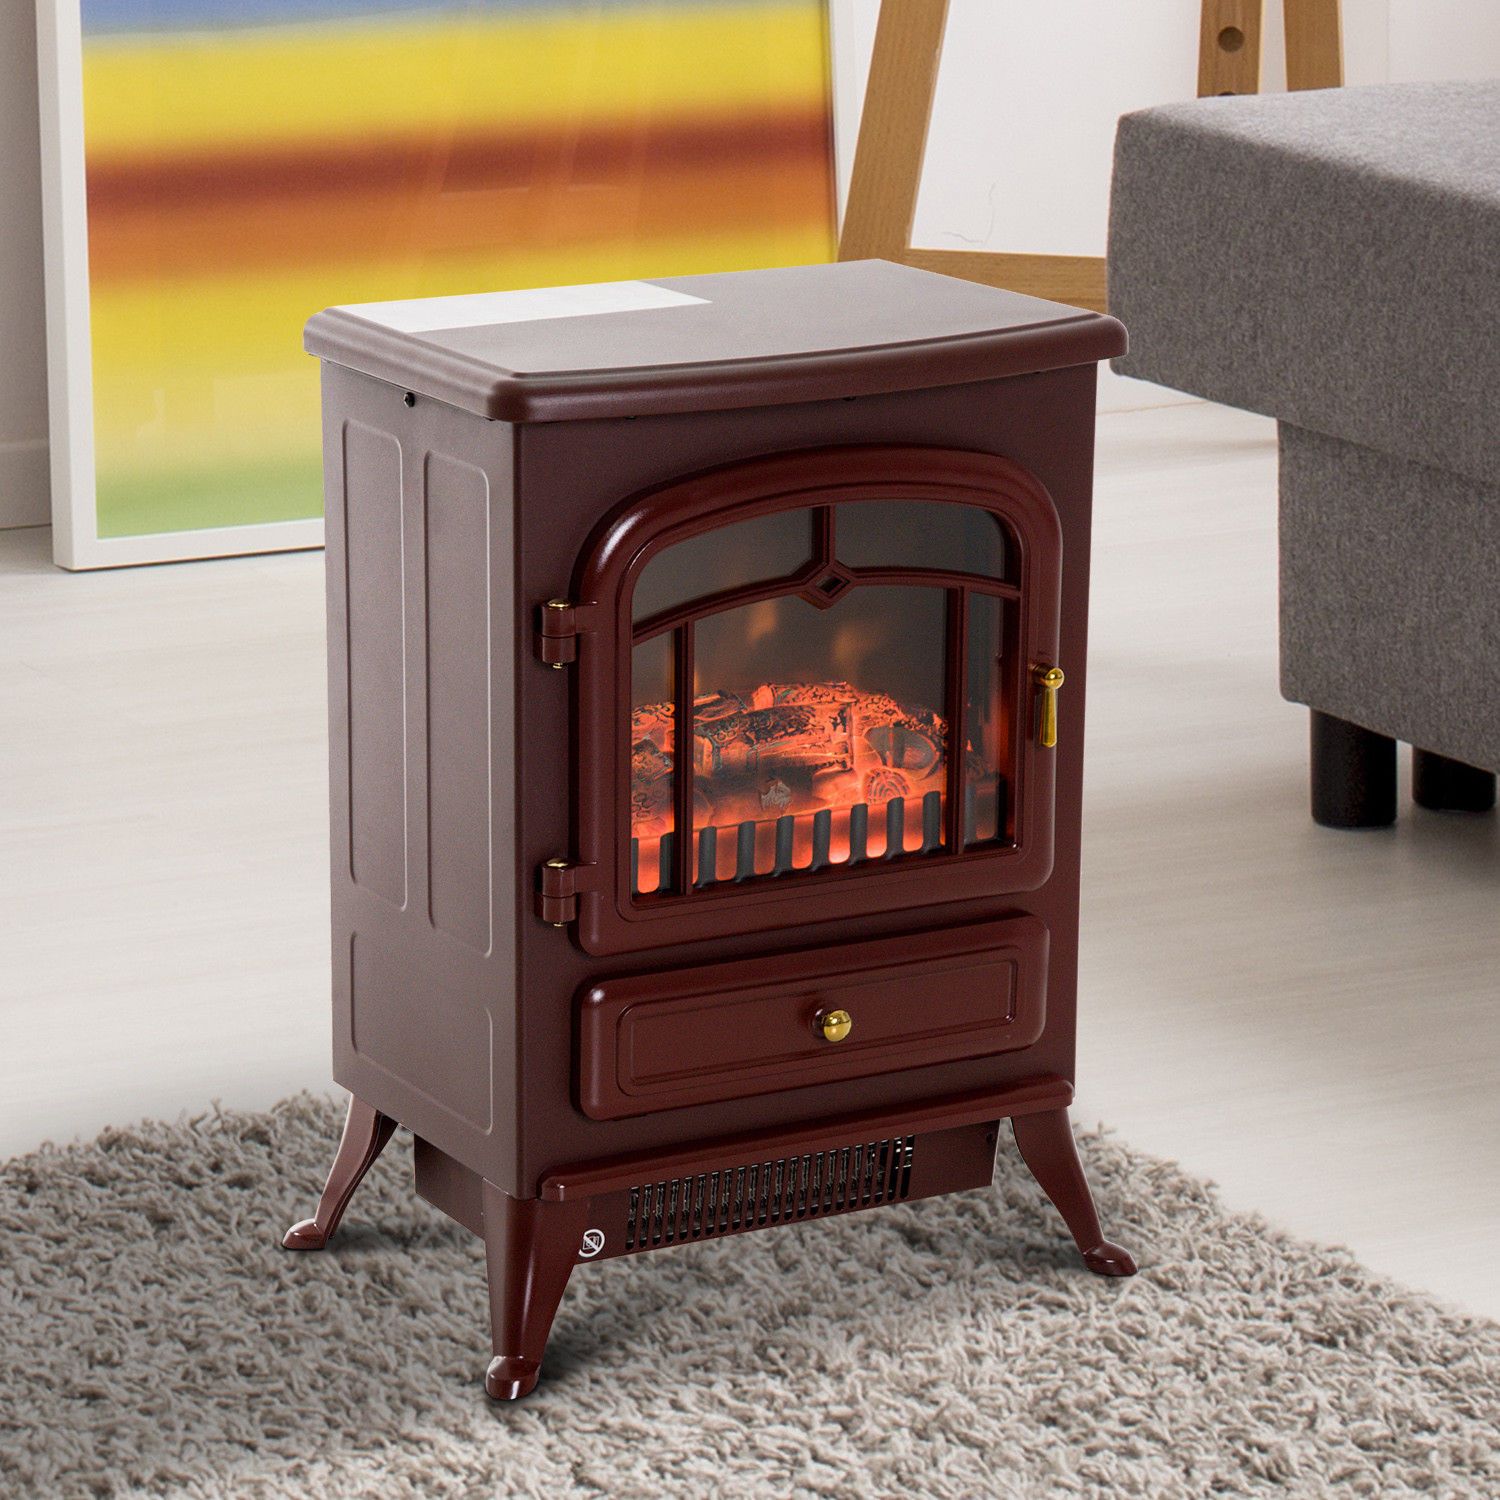 Stoves and Fireplaces Lovely Hom 16” 1500 Watt Free Standing Electric Wood Stove